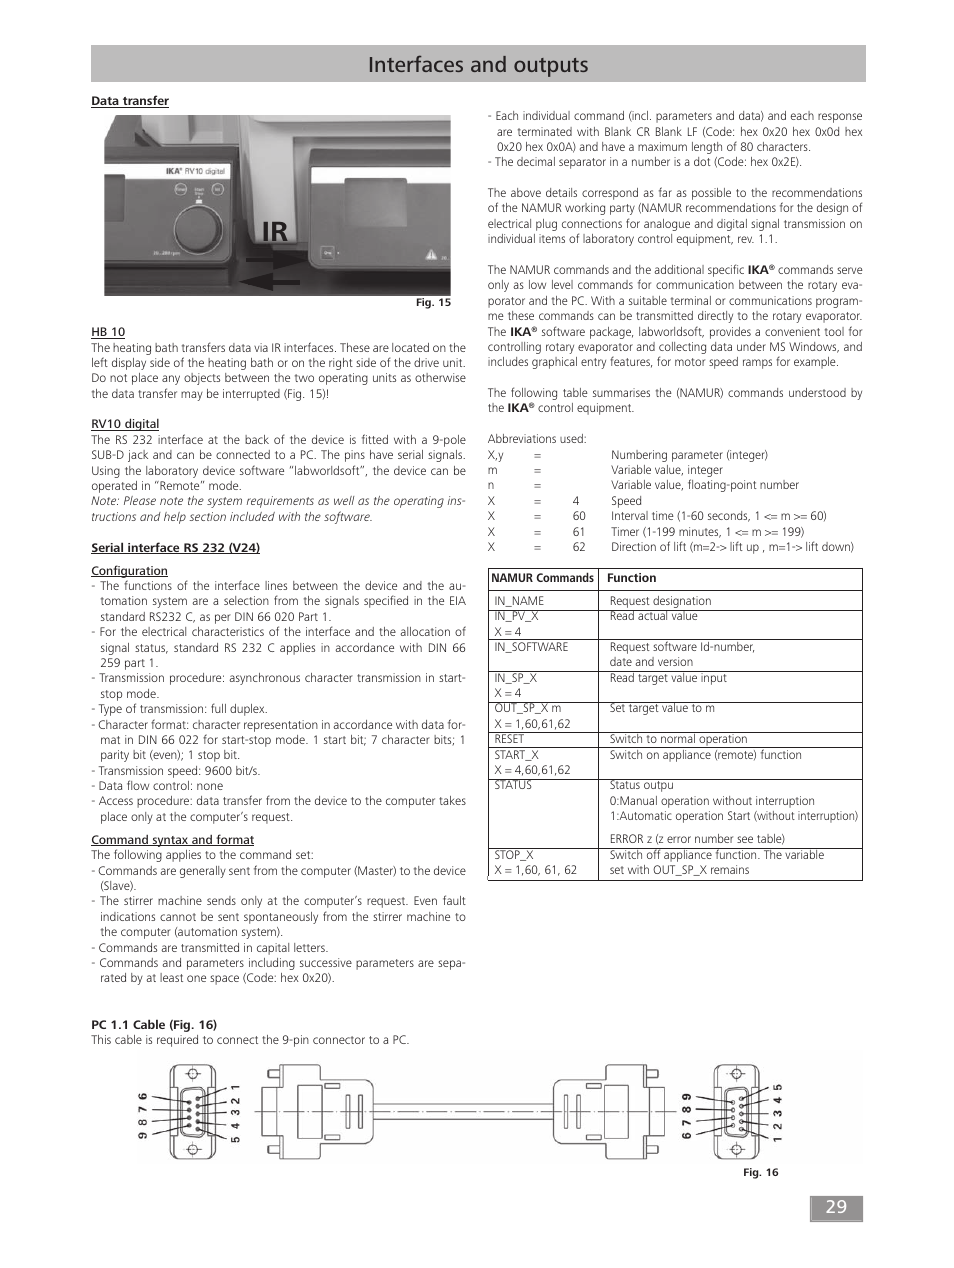 Interfaces and outputs | IKA RV 10 digital FLEX User Manual | Page 29 / 84